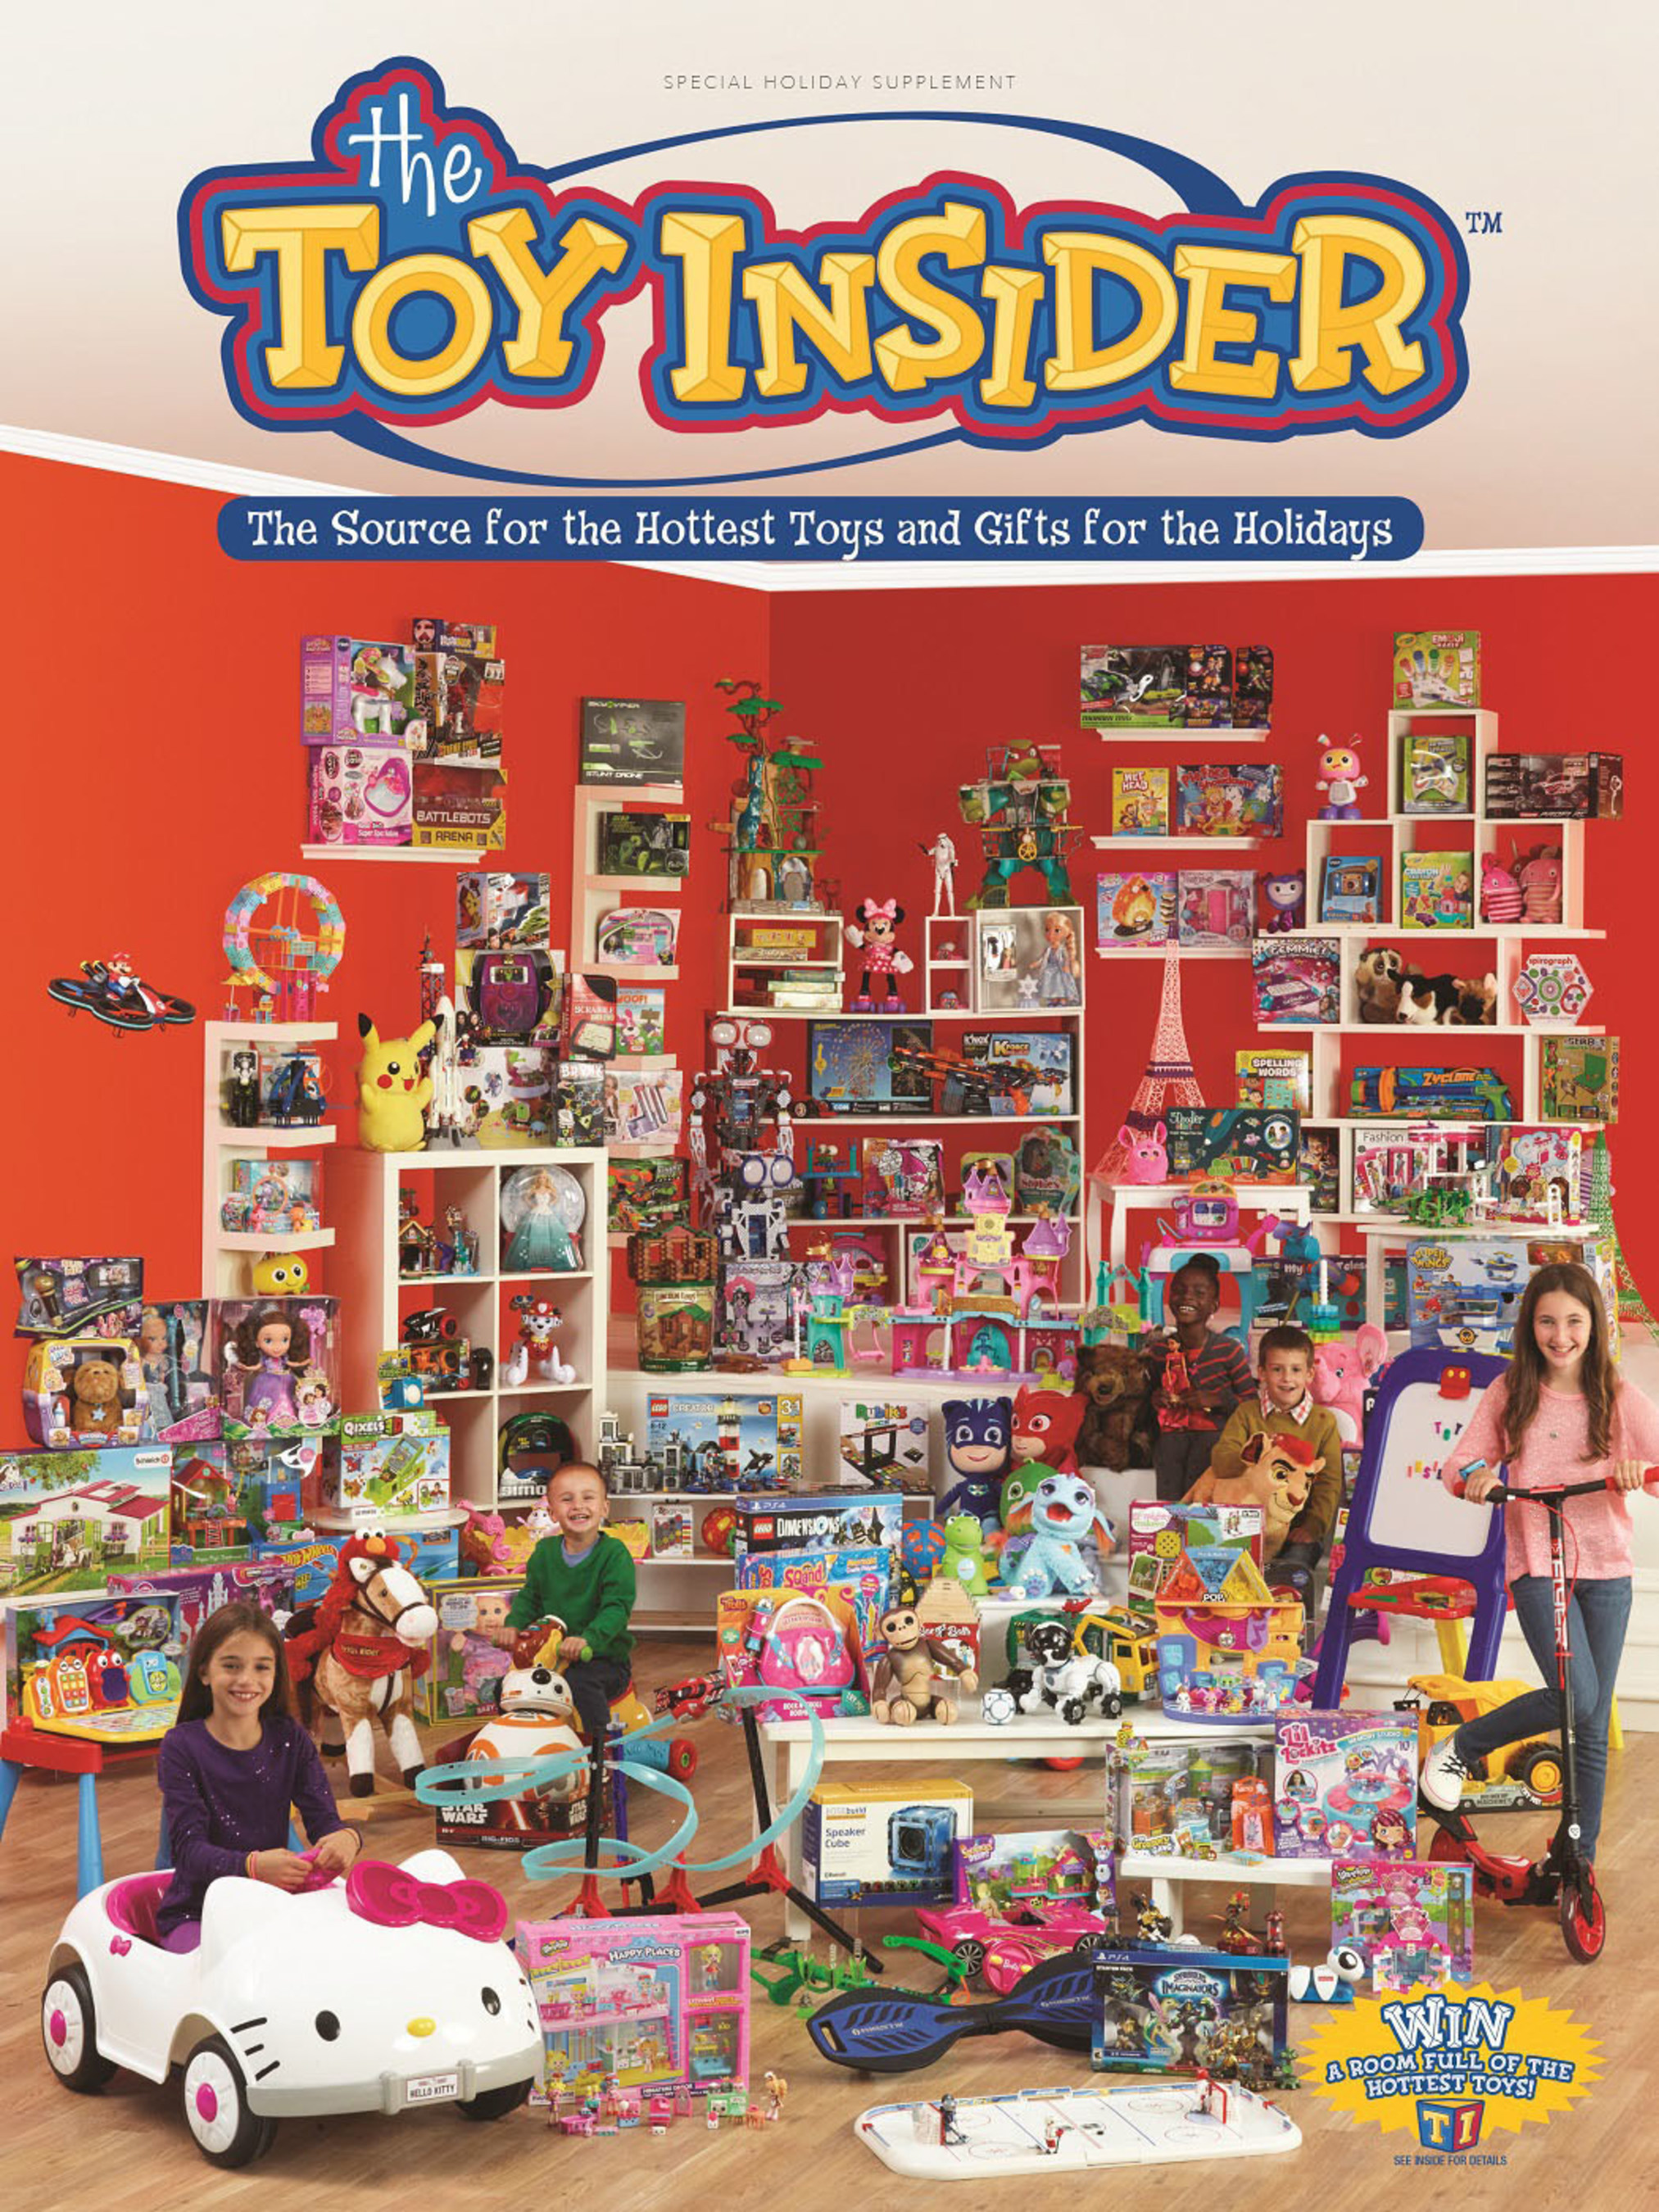 Hottest Summer Toys For 2016 - Candy Krusher - The Toy Insider